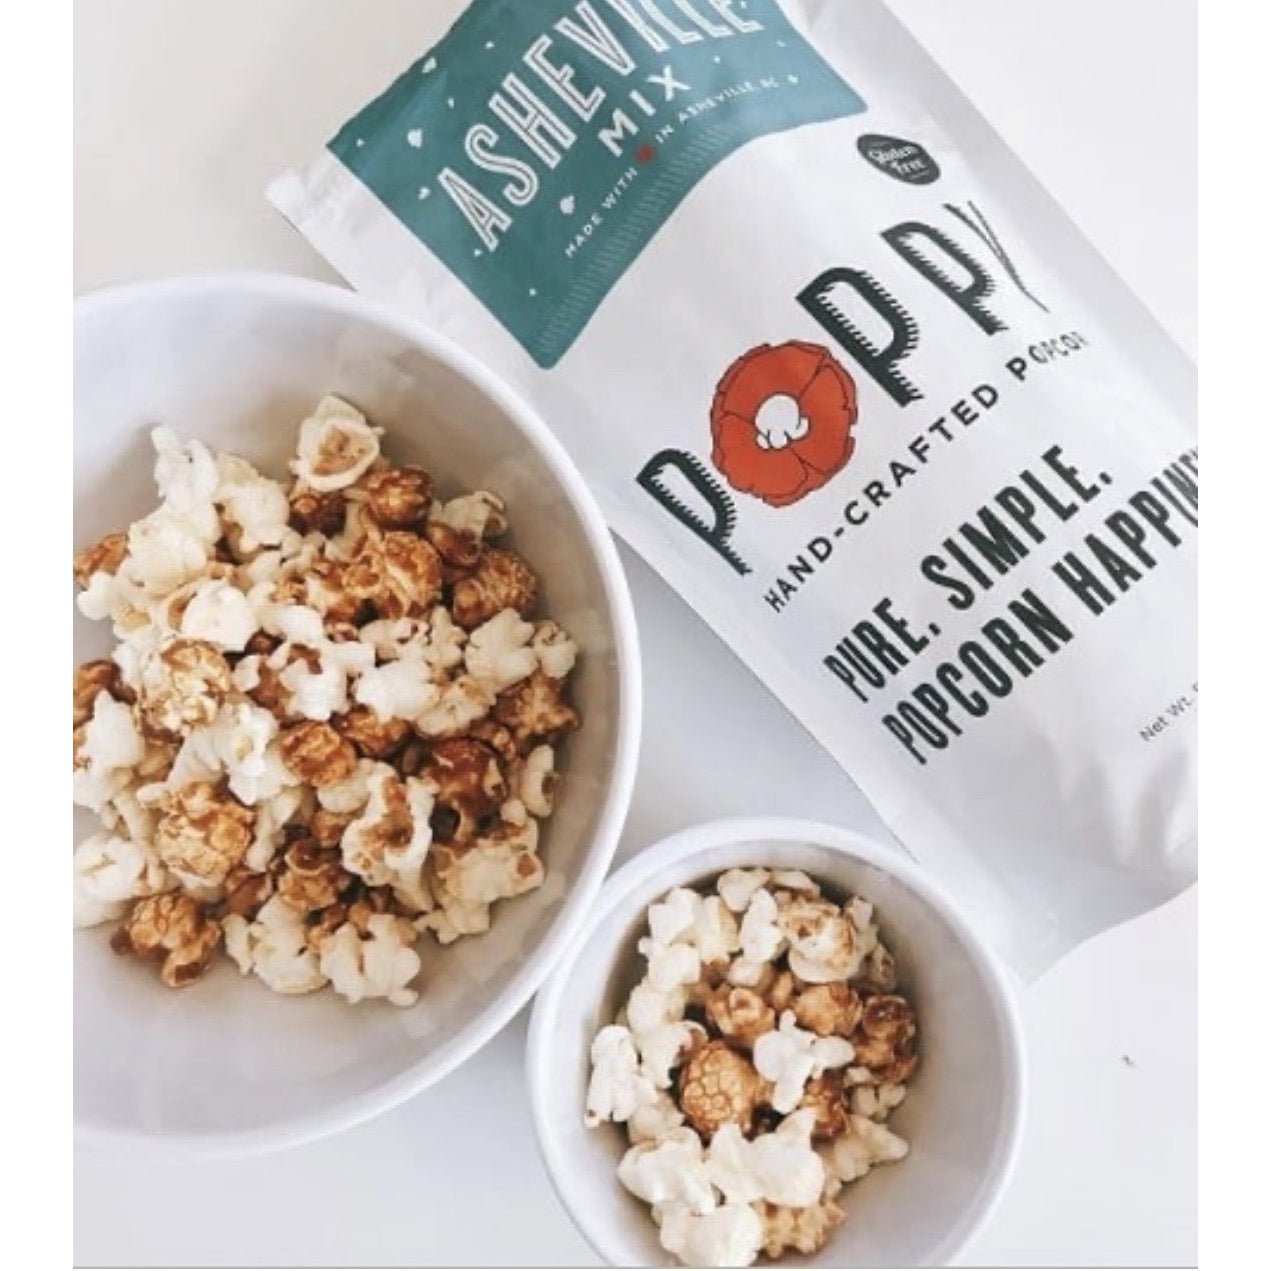 Asheville Mix Popcorn-Edibles-Poppy Handcrafted Popcorn-So &amp; Sew Boutique